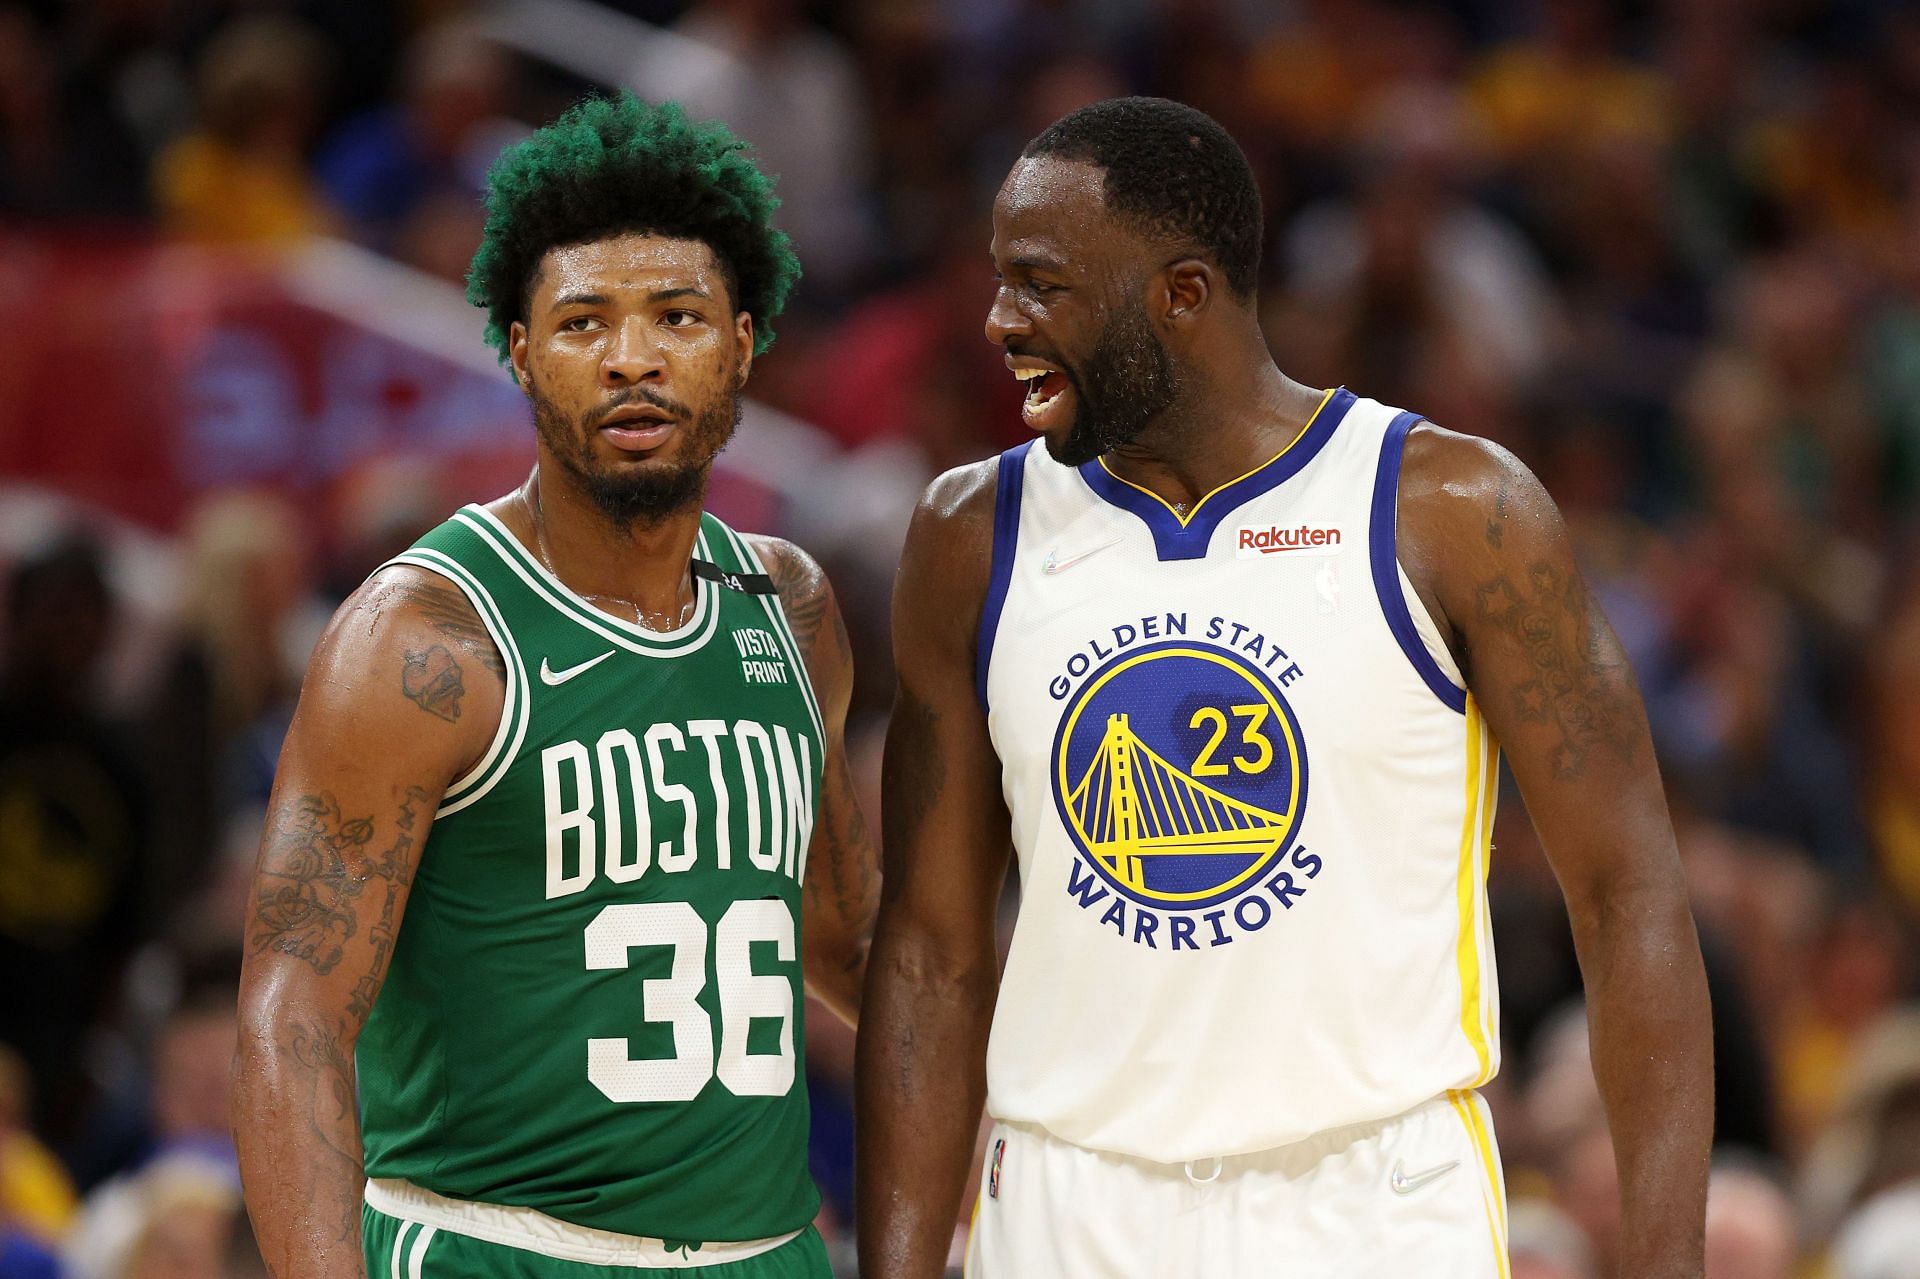 Marcus Smart, left, and Draymond Green, right